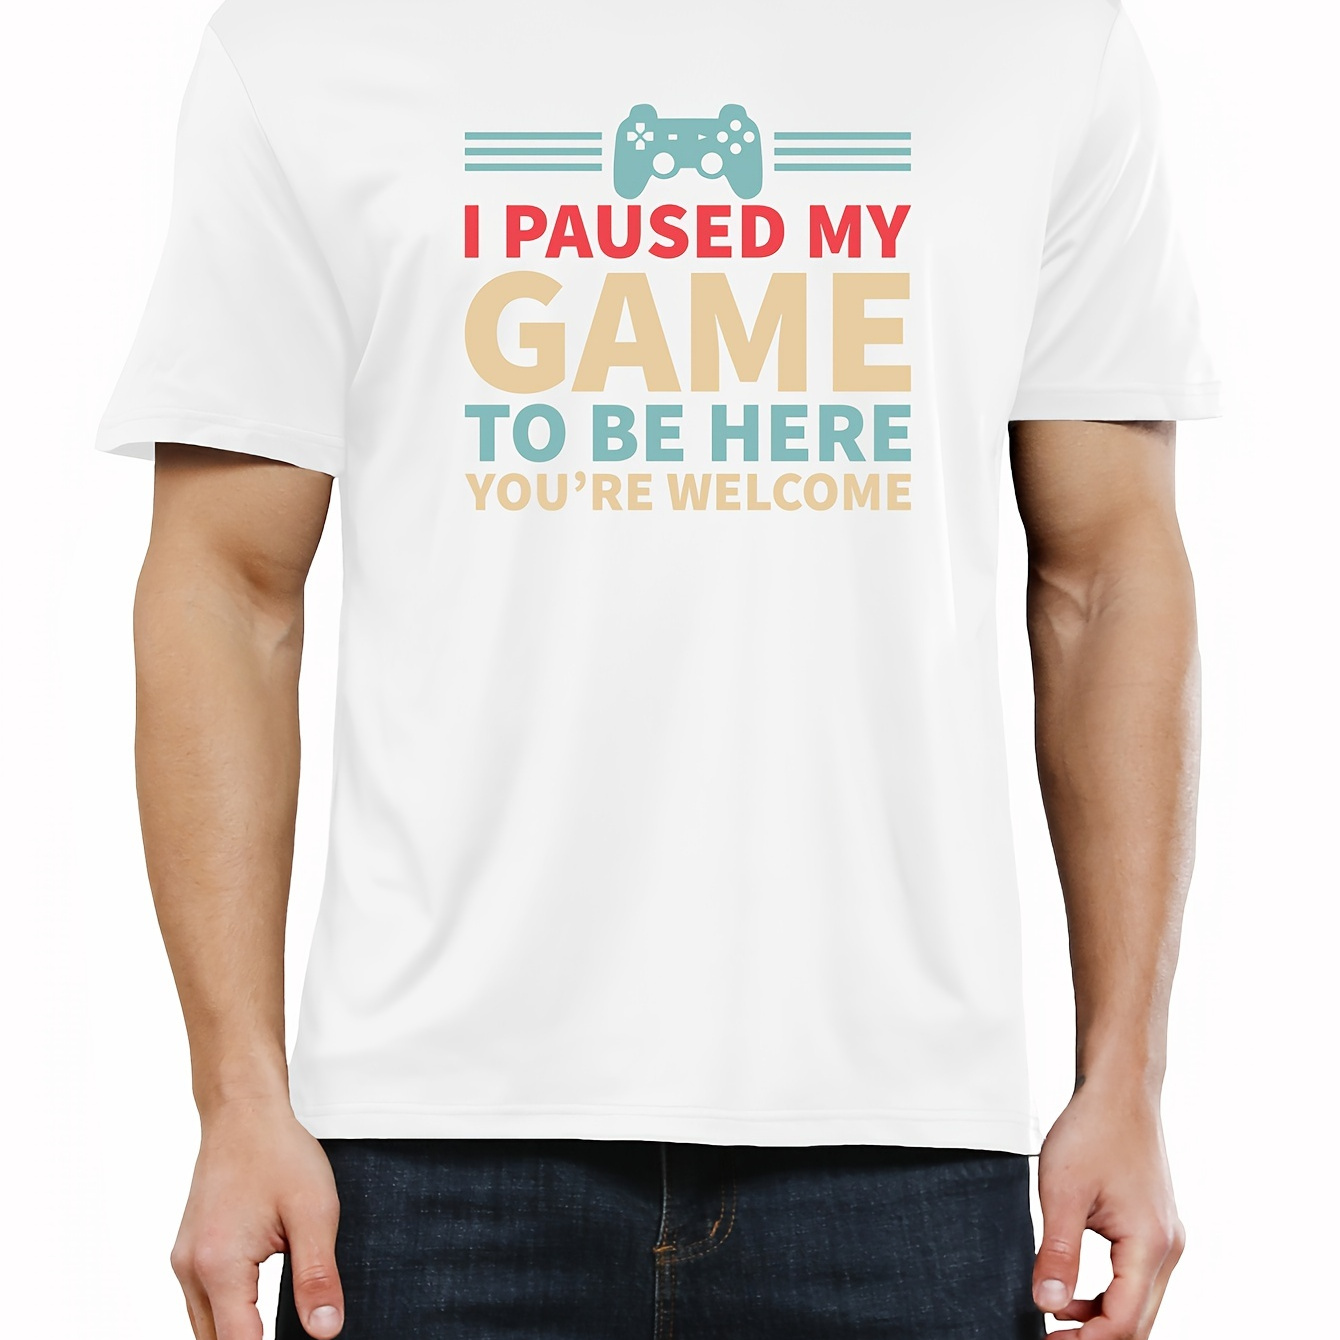 

I Paused My Game To Be Here... Print Tee Shirt, Tees For Men, Casual Short Sleeve T-shirt For Summer